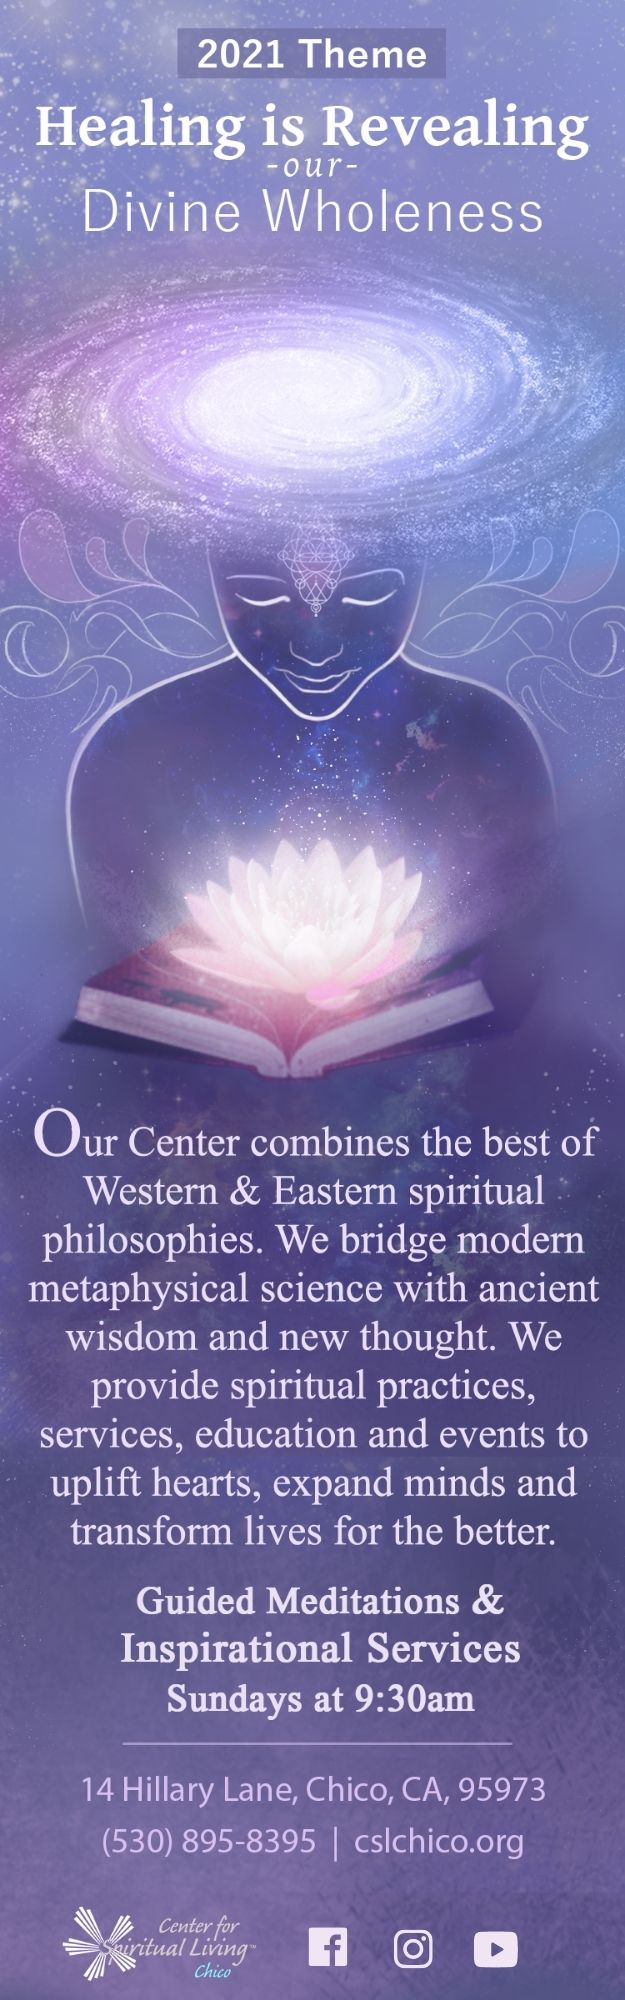 2021 csl chico bookmark Healing is Revealing our Divine Wholeness. Bookmark image contains light blue and purple swirls and a drawing of a cosmic person reading a booking opening a glowing lotus